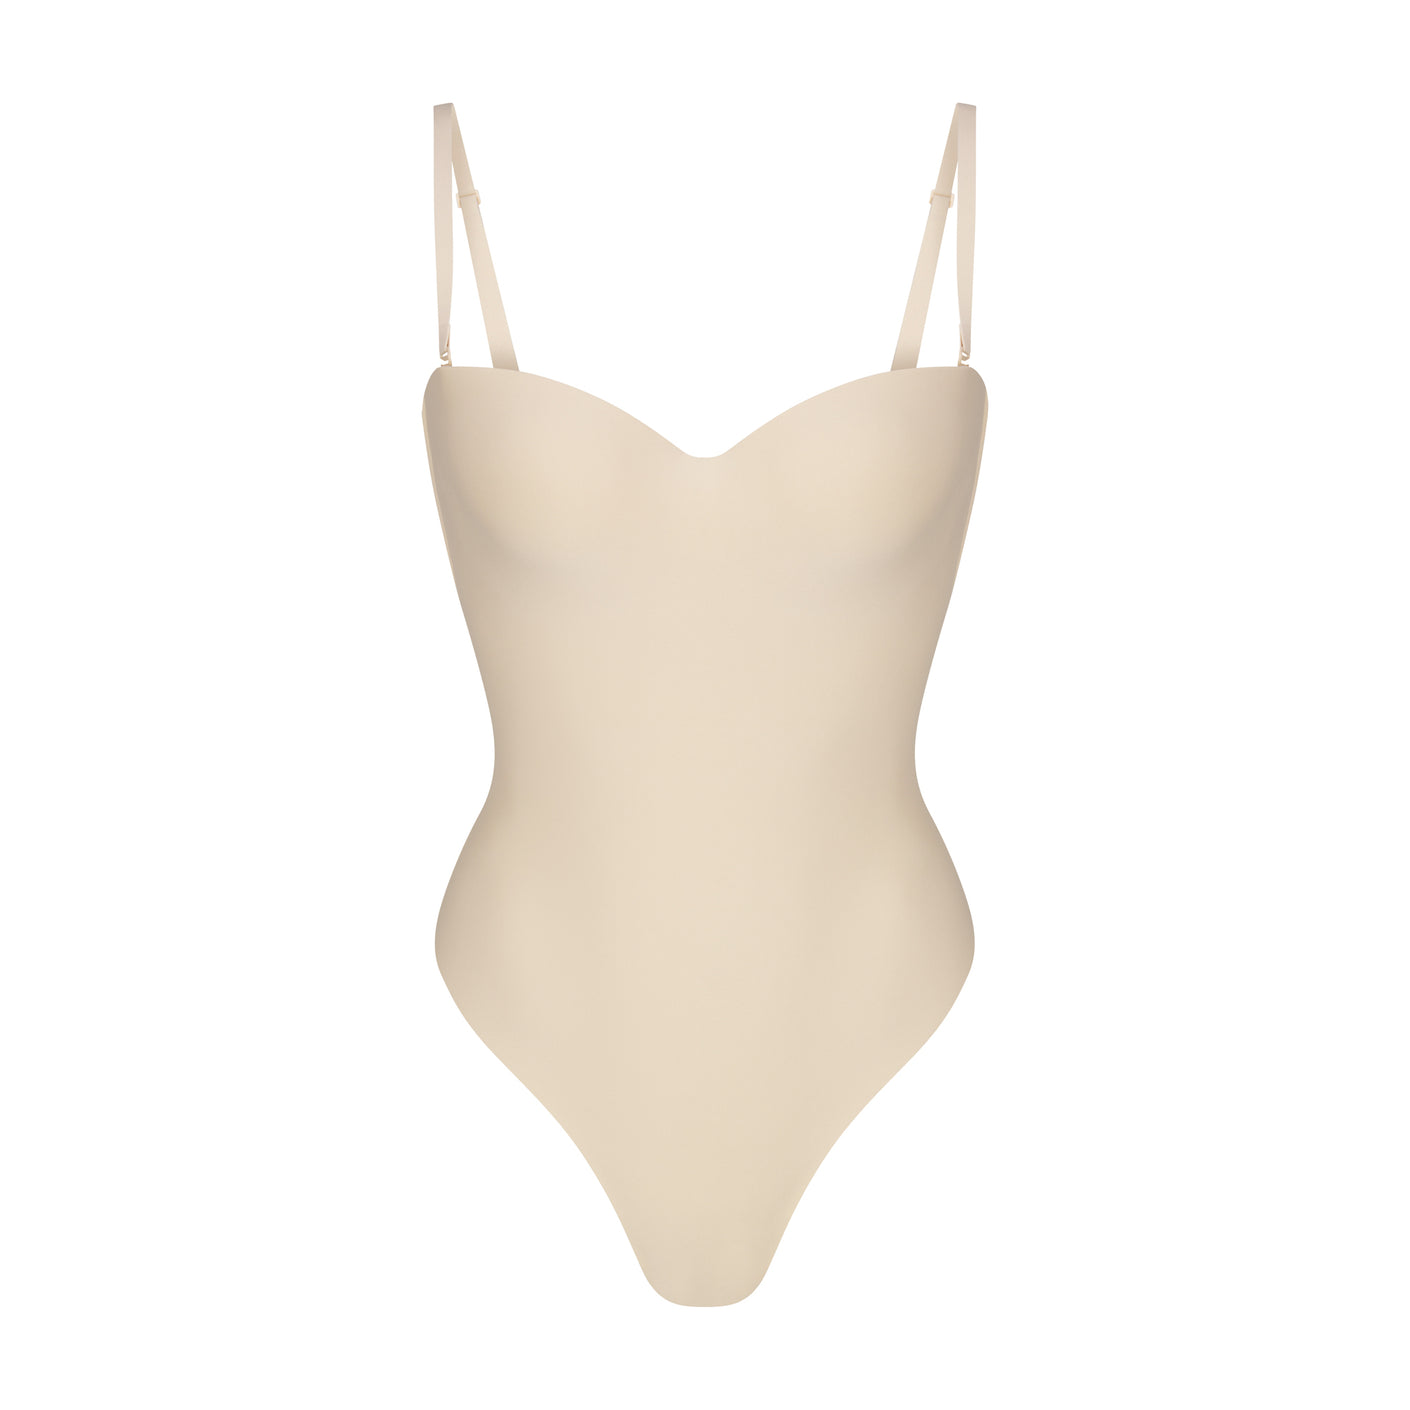 Wolford Shapewear — choose from 8 items